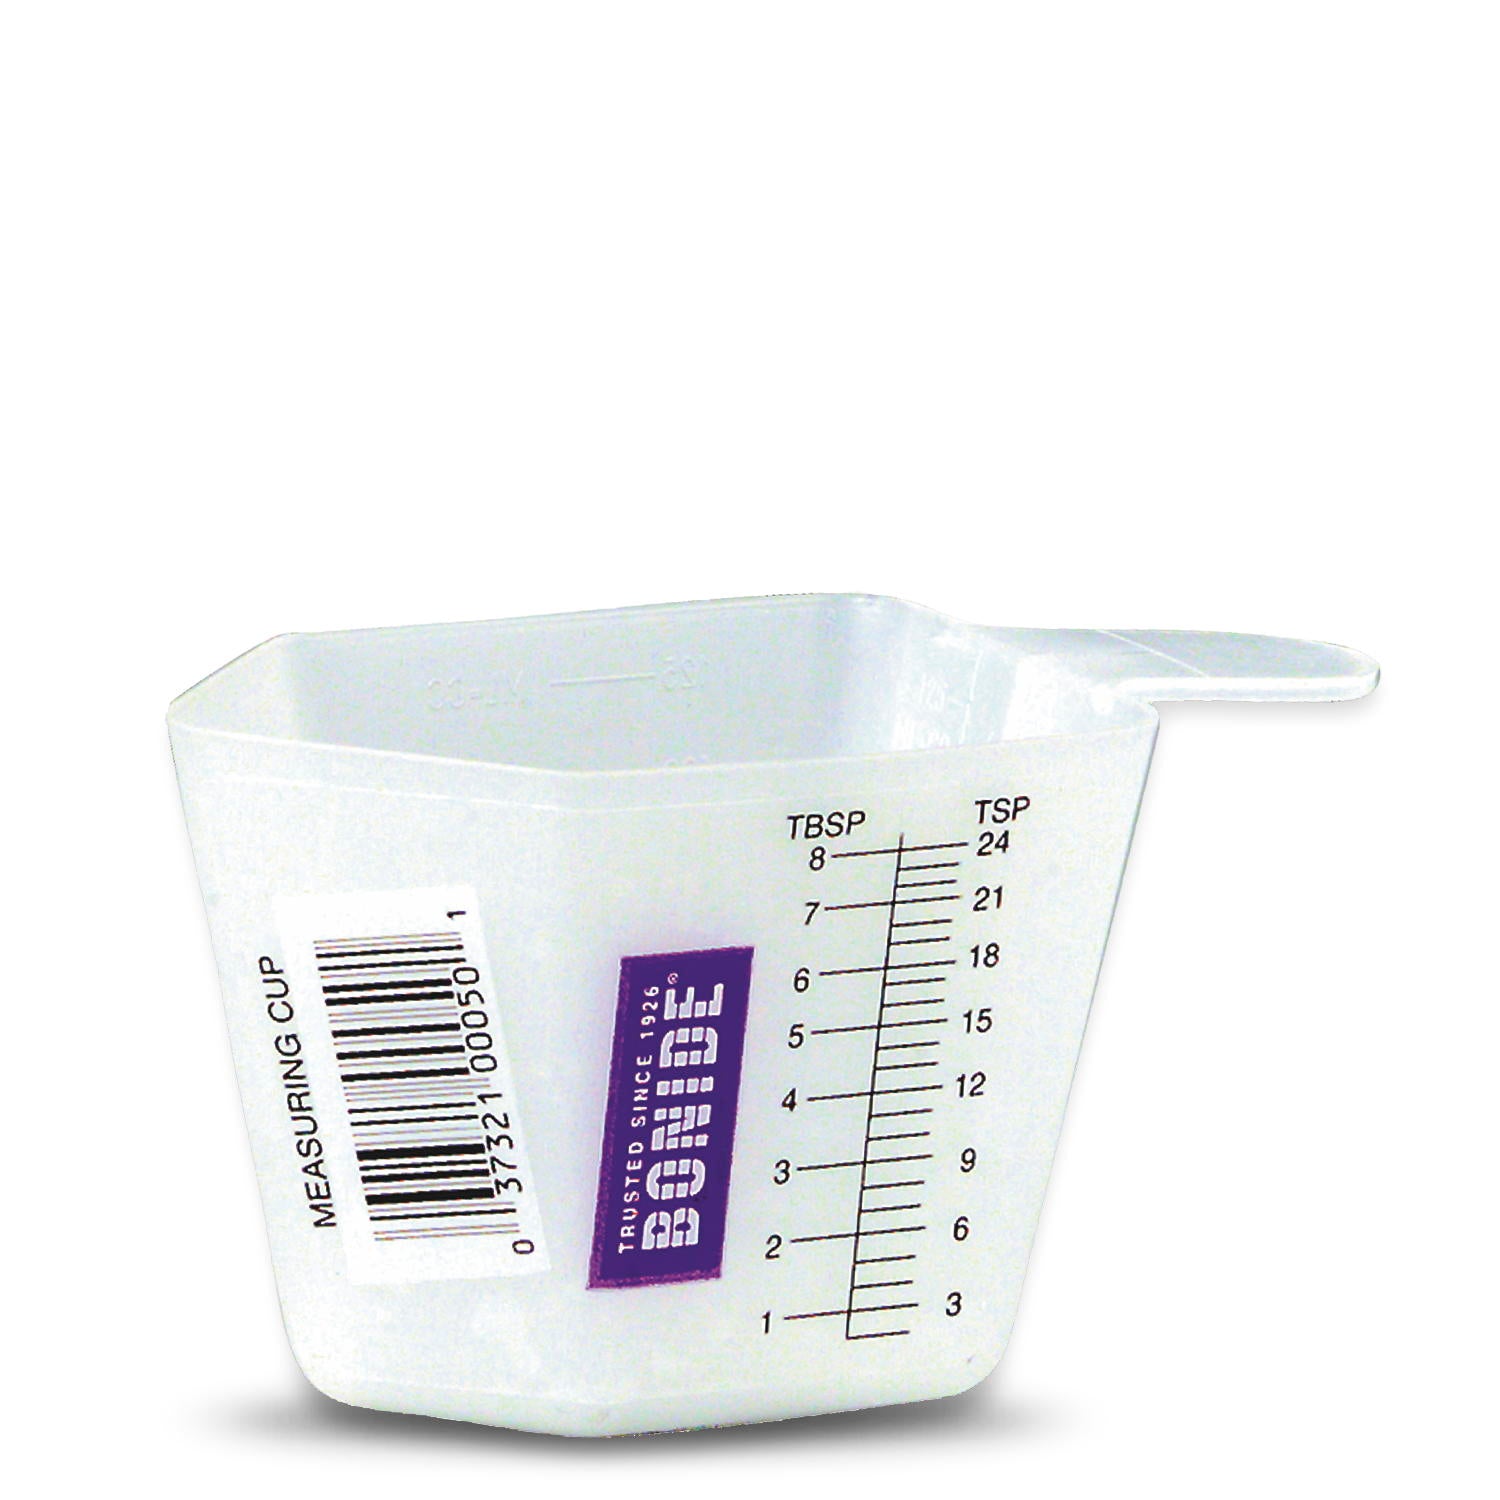 A small measuring cup great for herbicides, pesticides and insecticides. 